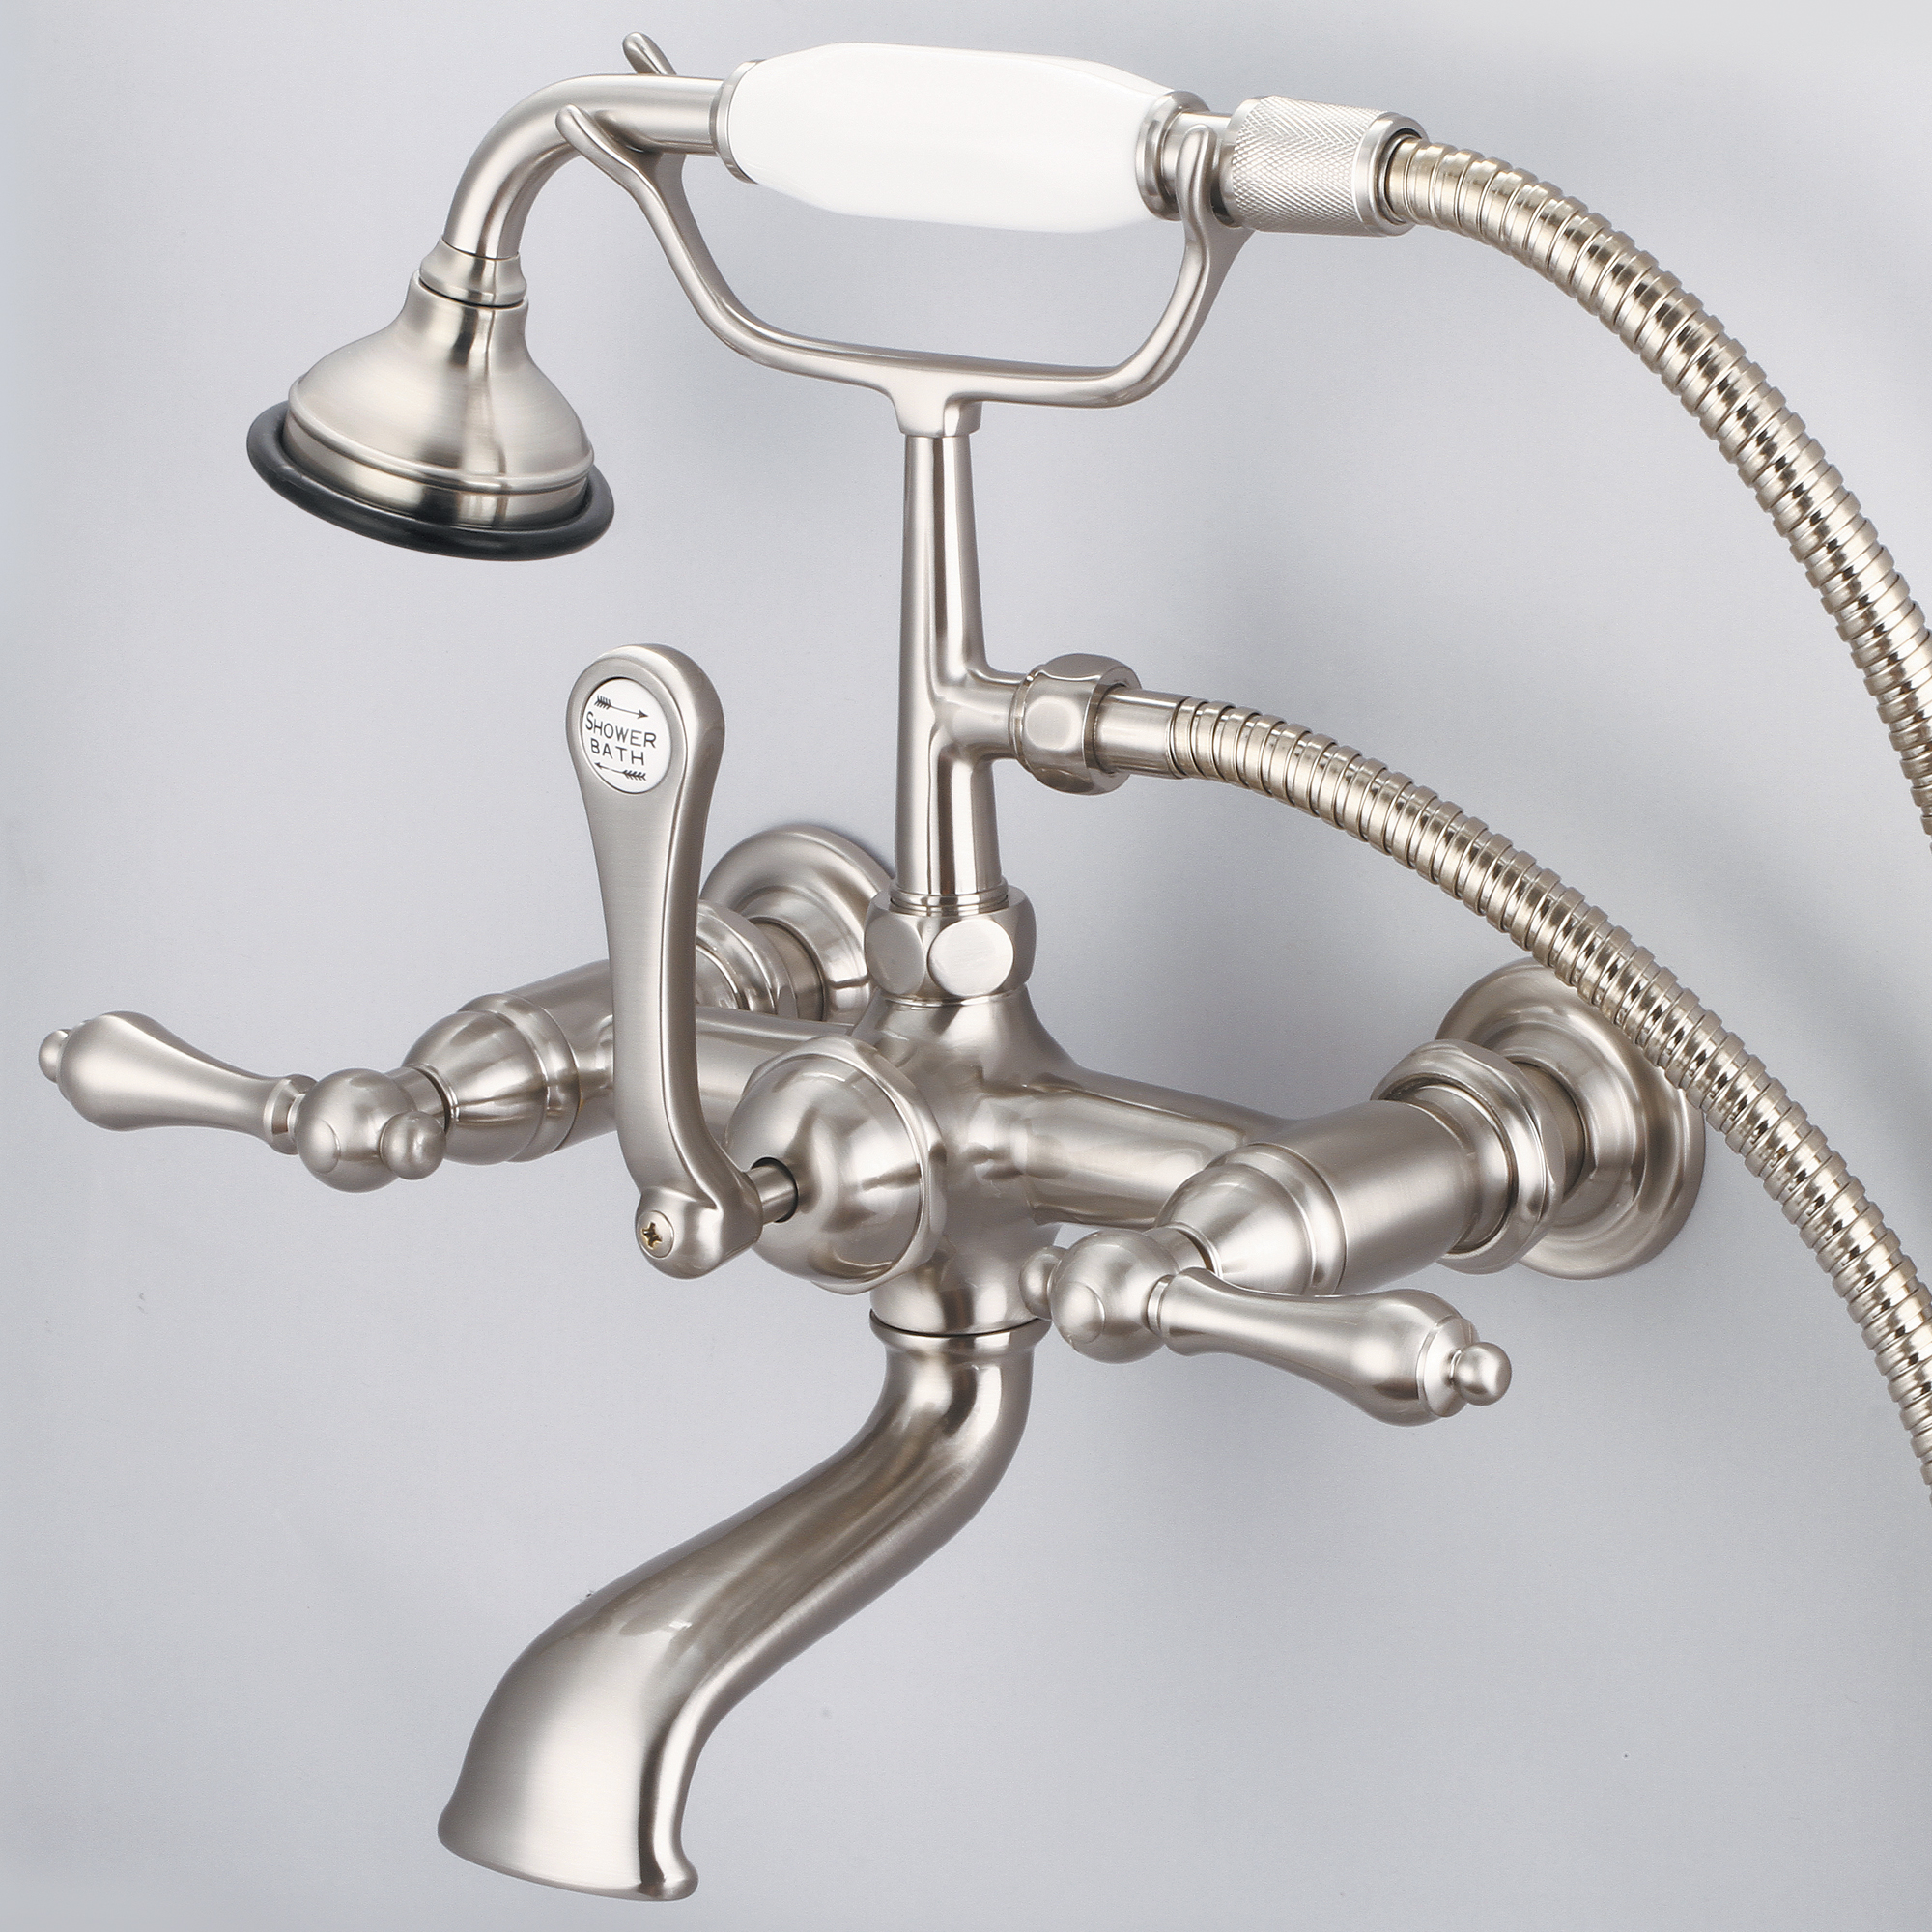 Vintage Classic 7 Inch Spread Wall Mount Tub Faucet With Straight Wall Connector & Handheld Shower in Brushed Nickel Finish With Metal Lever Handles Without Labels